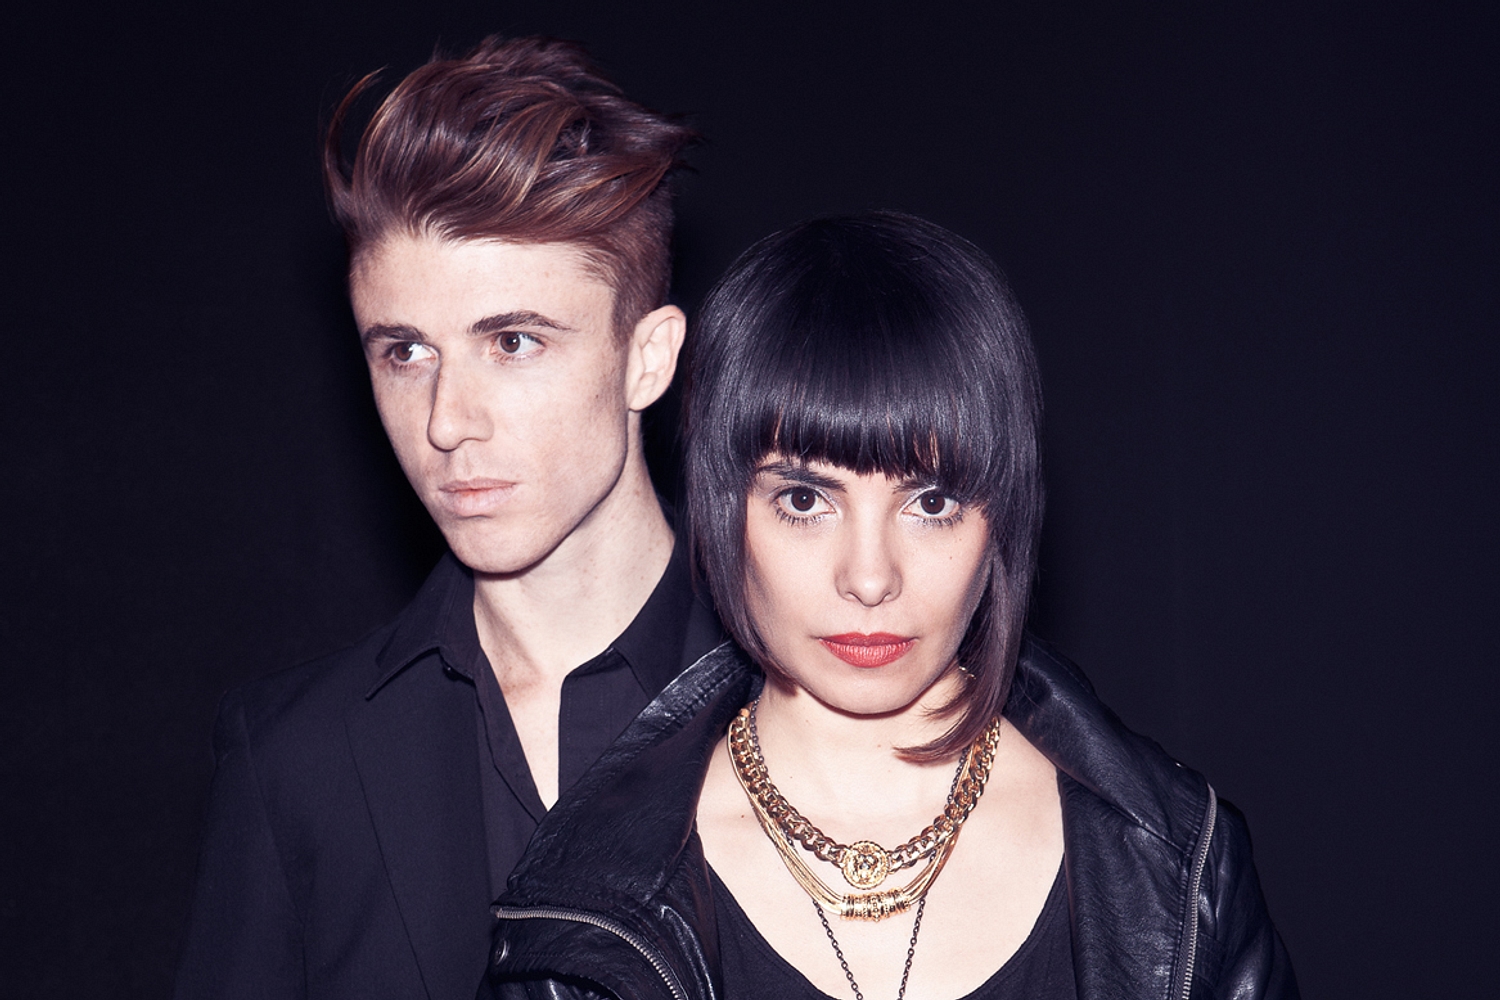 School Of Seven Bells plan to complete unfinished fourth album